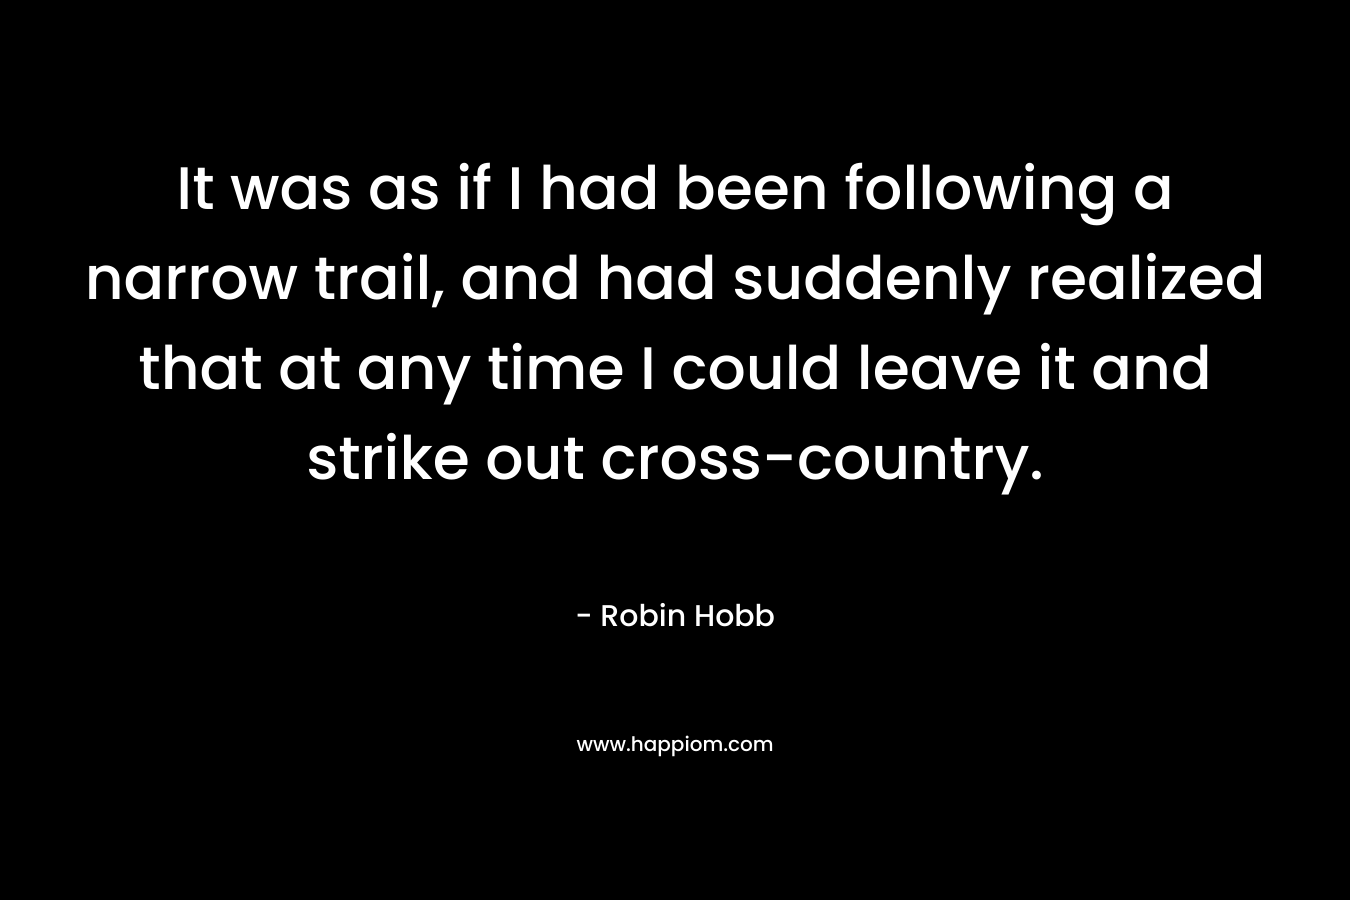 It was as if I had been following a narrow trail, and had suddenly realized that at any time I could leave it and strike out cross-country. – Robin Hobb